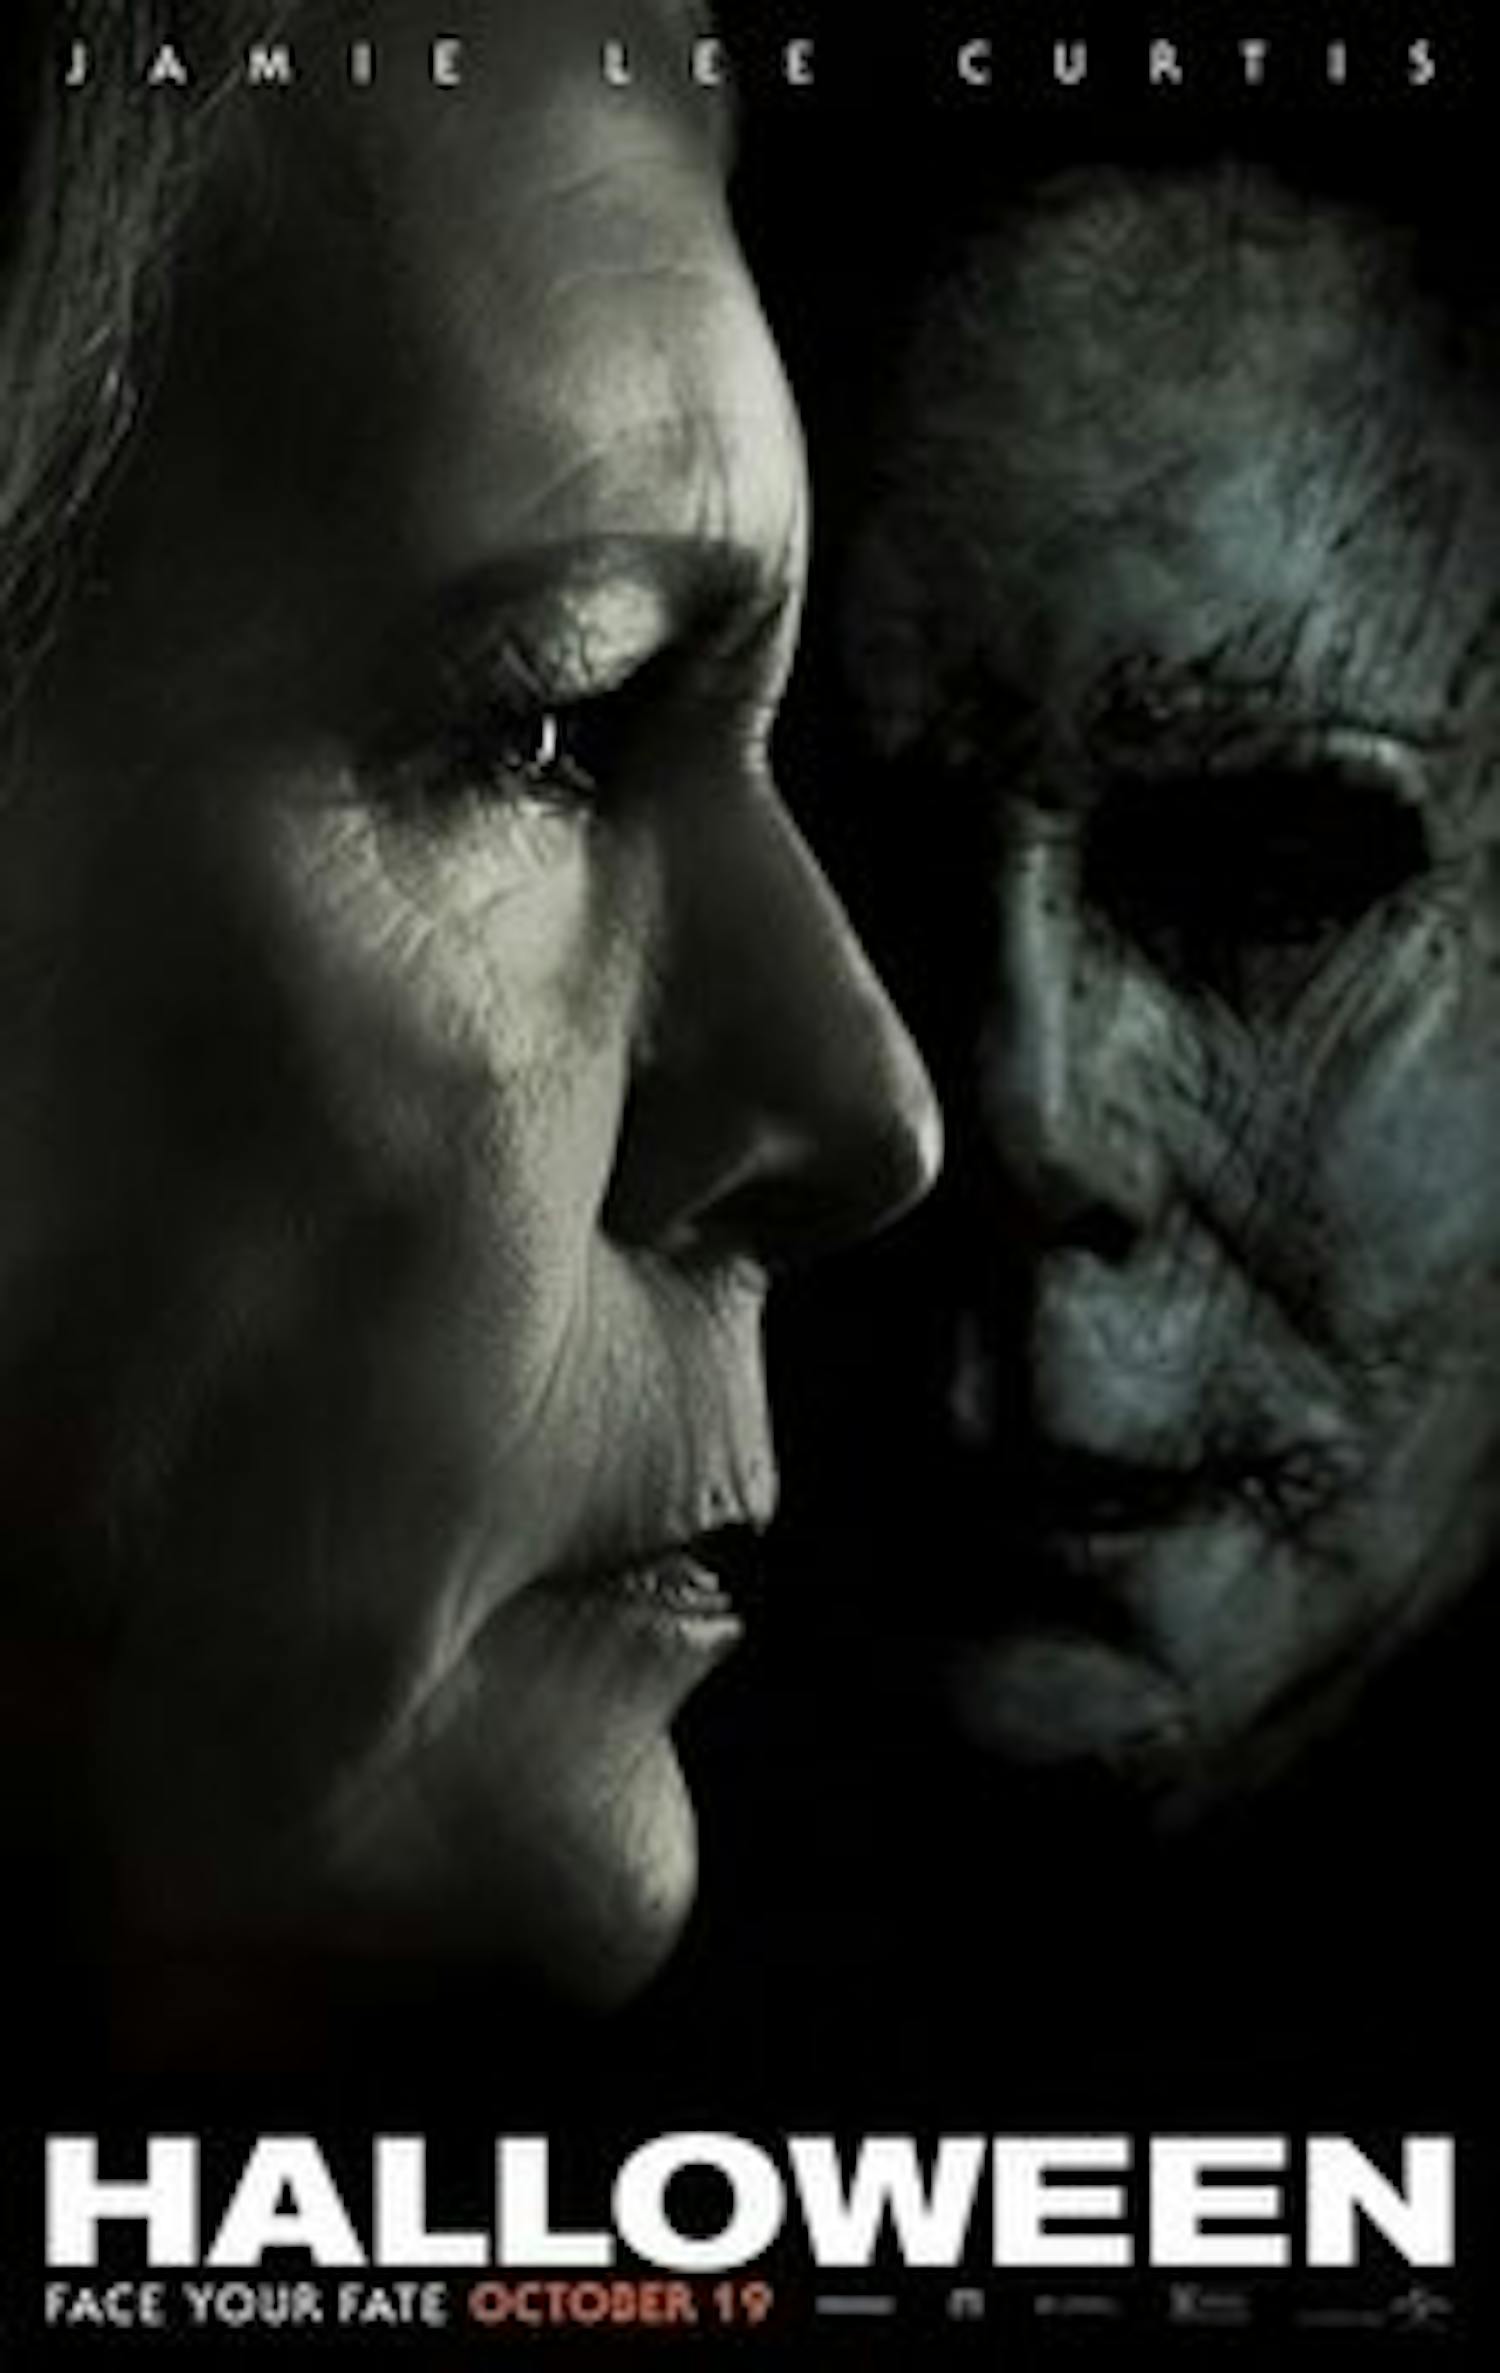 “Halloween” reinvigorates the franchise with a fresh take on the original 1978 film. By ignoring every sequel, director David Gordon Green pays homage to the horror classic without compromising narrative and suspense.